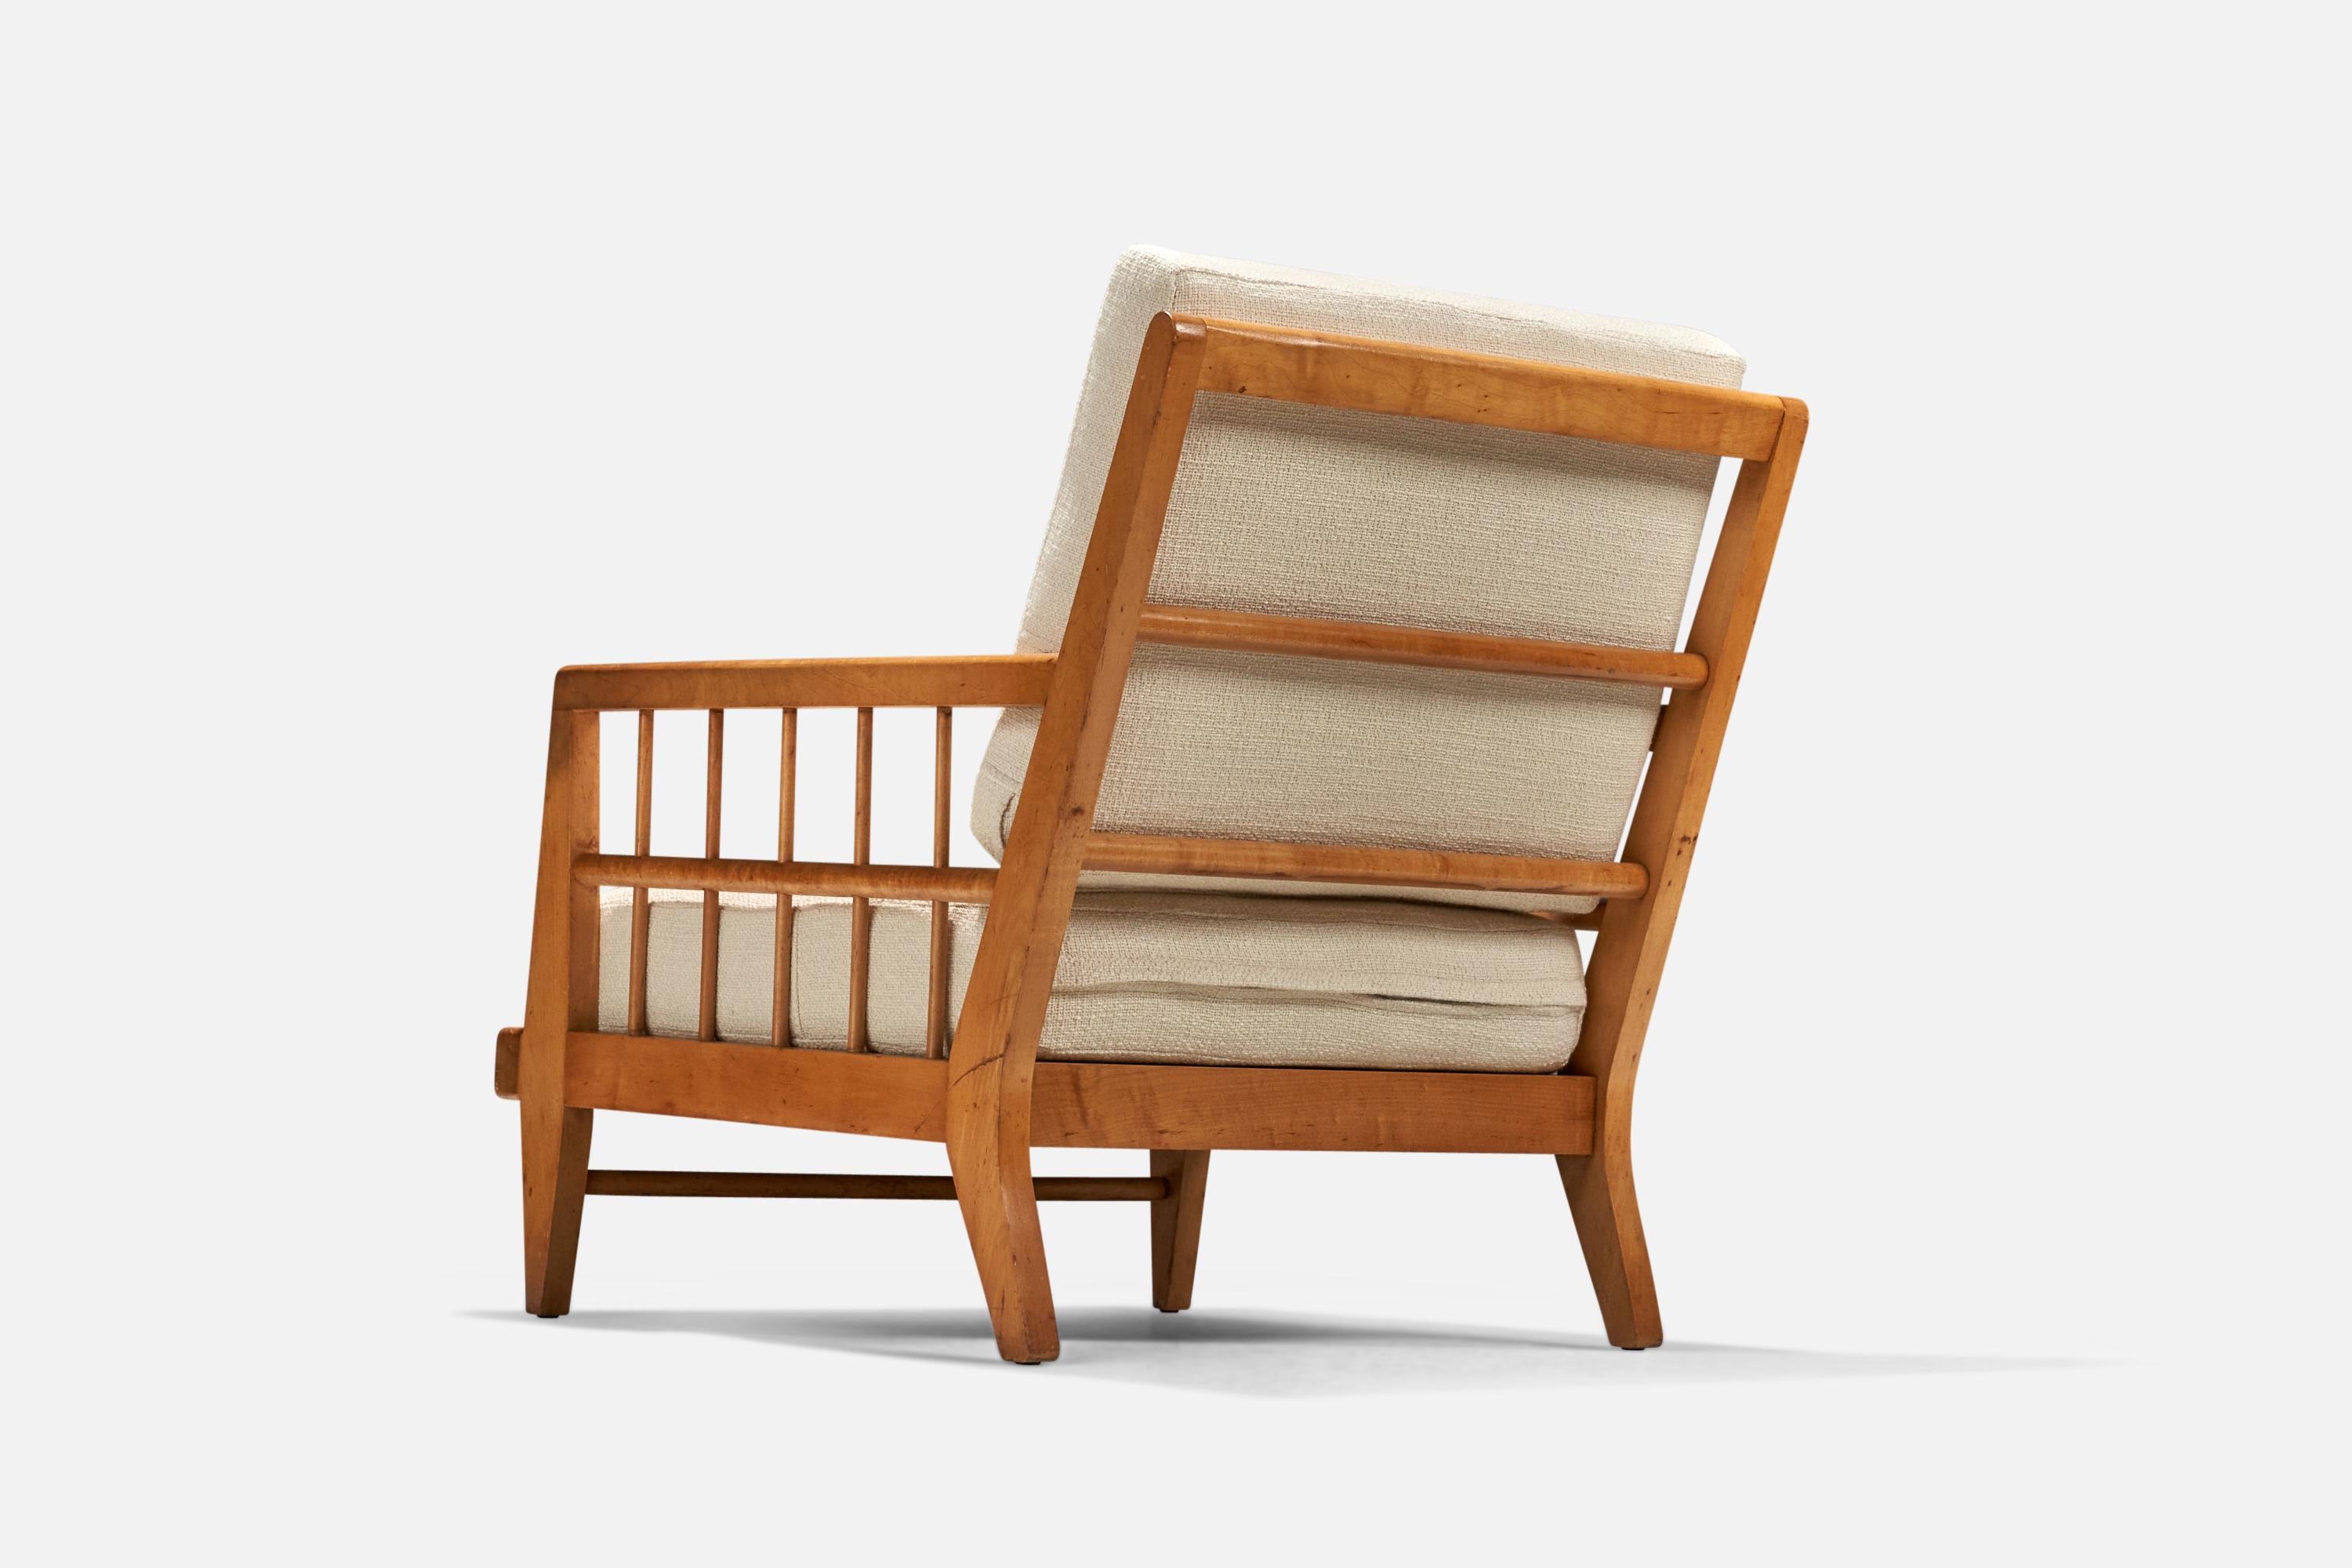 American Edward Wormley, Lounge Chairs, Beech, Fabric, Drexel, United States, 1940s For Sale